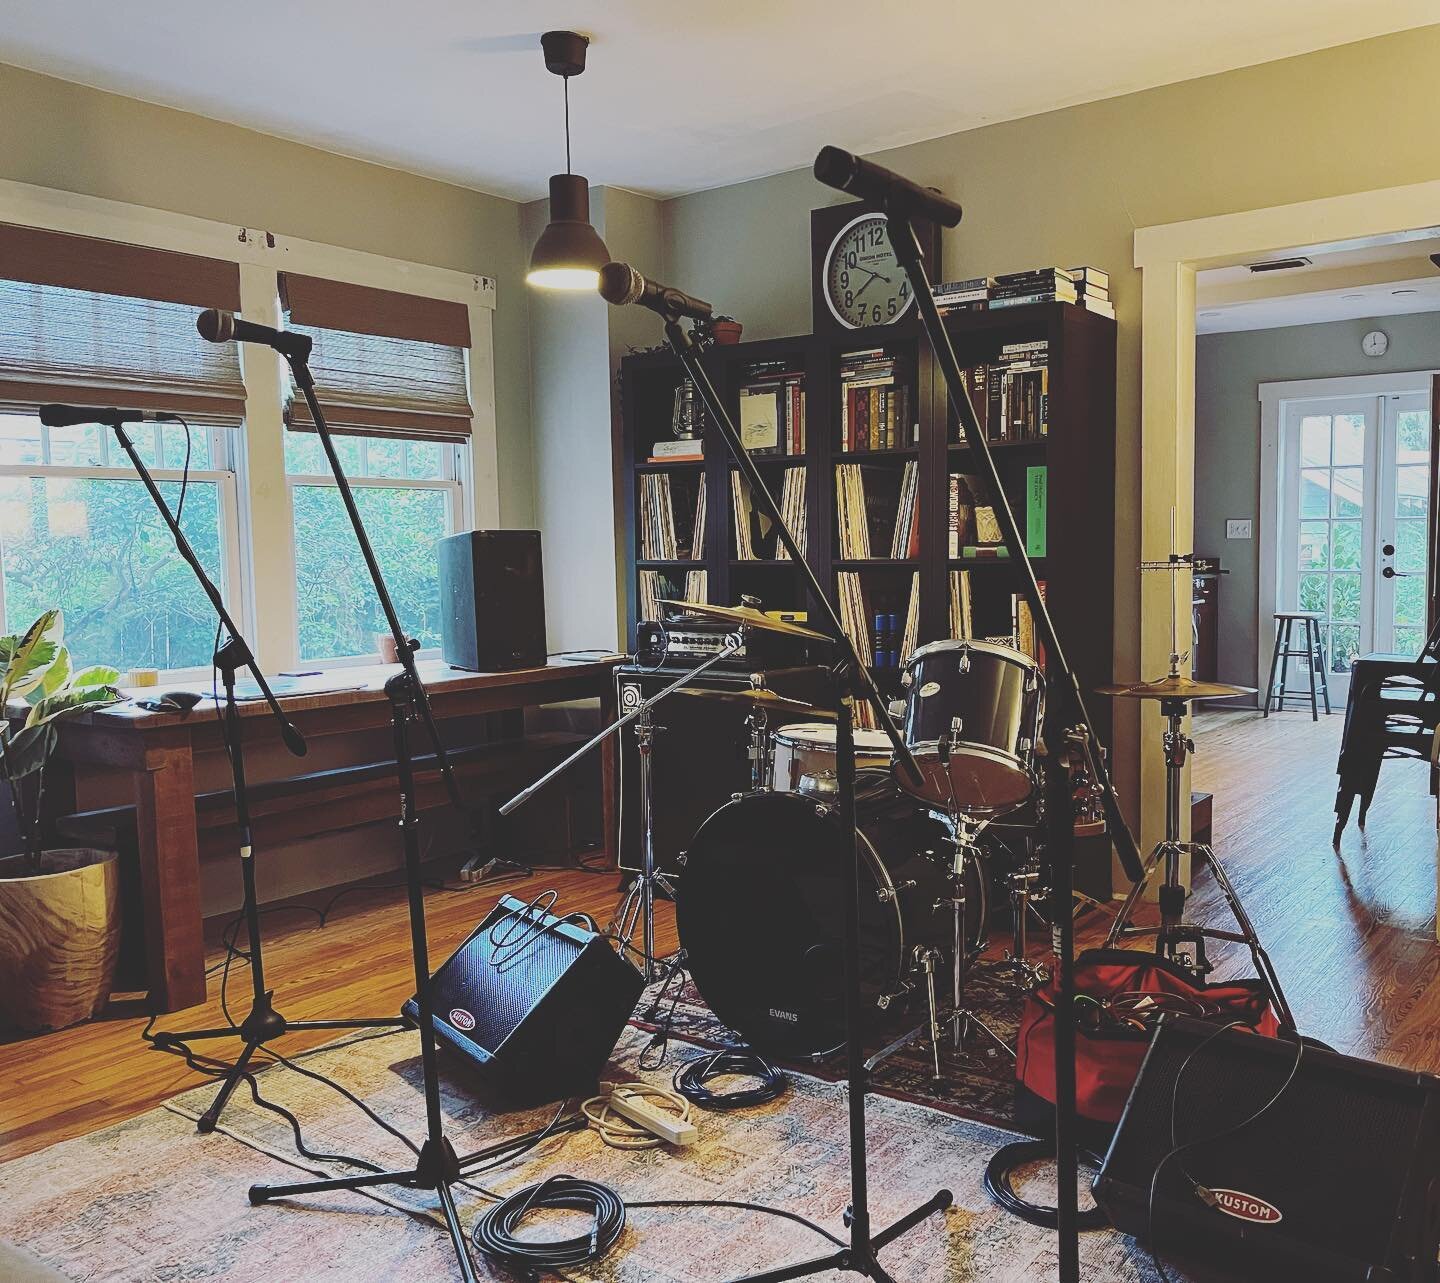 Final rehearsals getting under way for this Friday 8/19 @sevencmusic with @the_joshua_reilly , @mercymccoy , @the1adamrandall , and @taylorraynor . Great songwriters, all playing together. It&rsquo;s going to be a real hum dinger 🔥🎸🎤👏🏻💛

Rehear